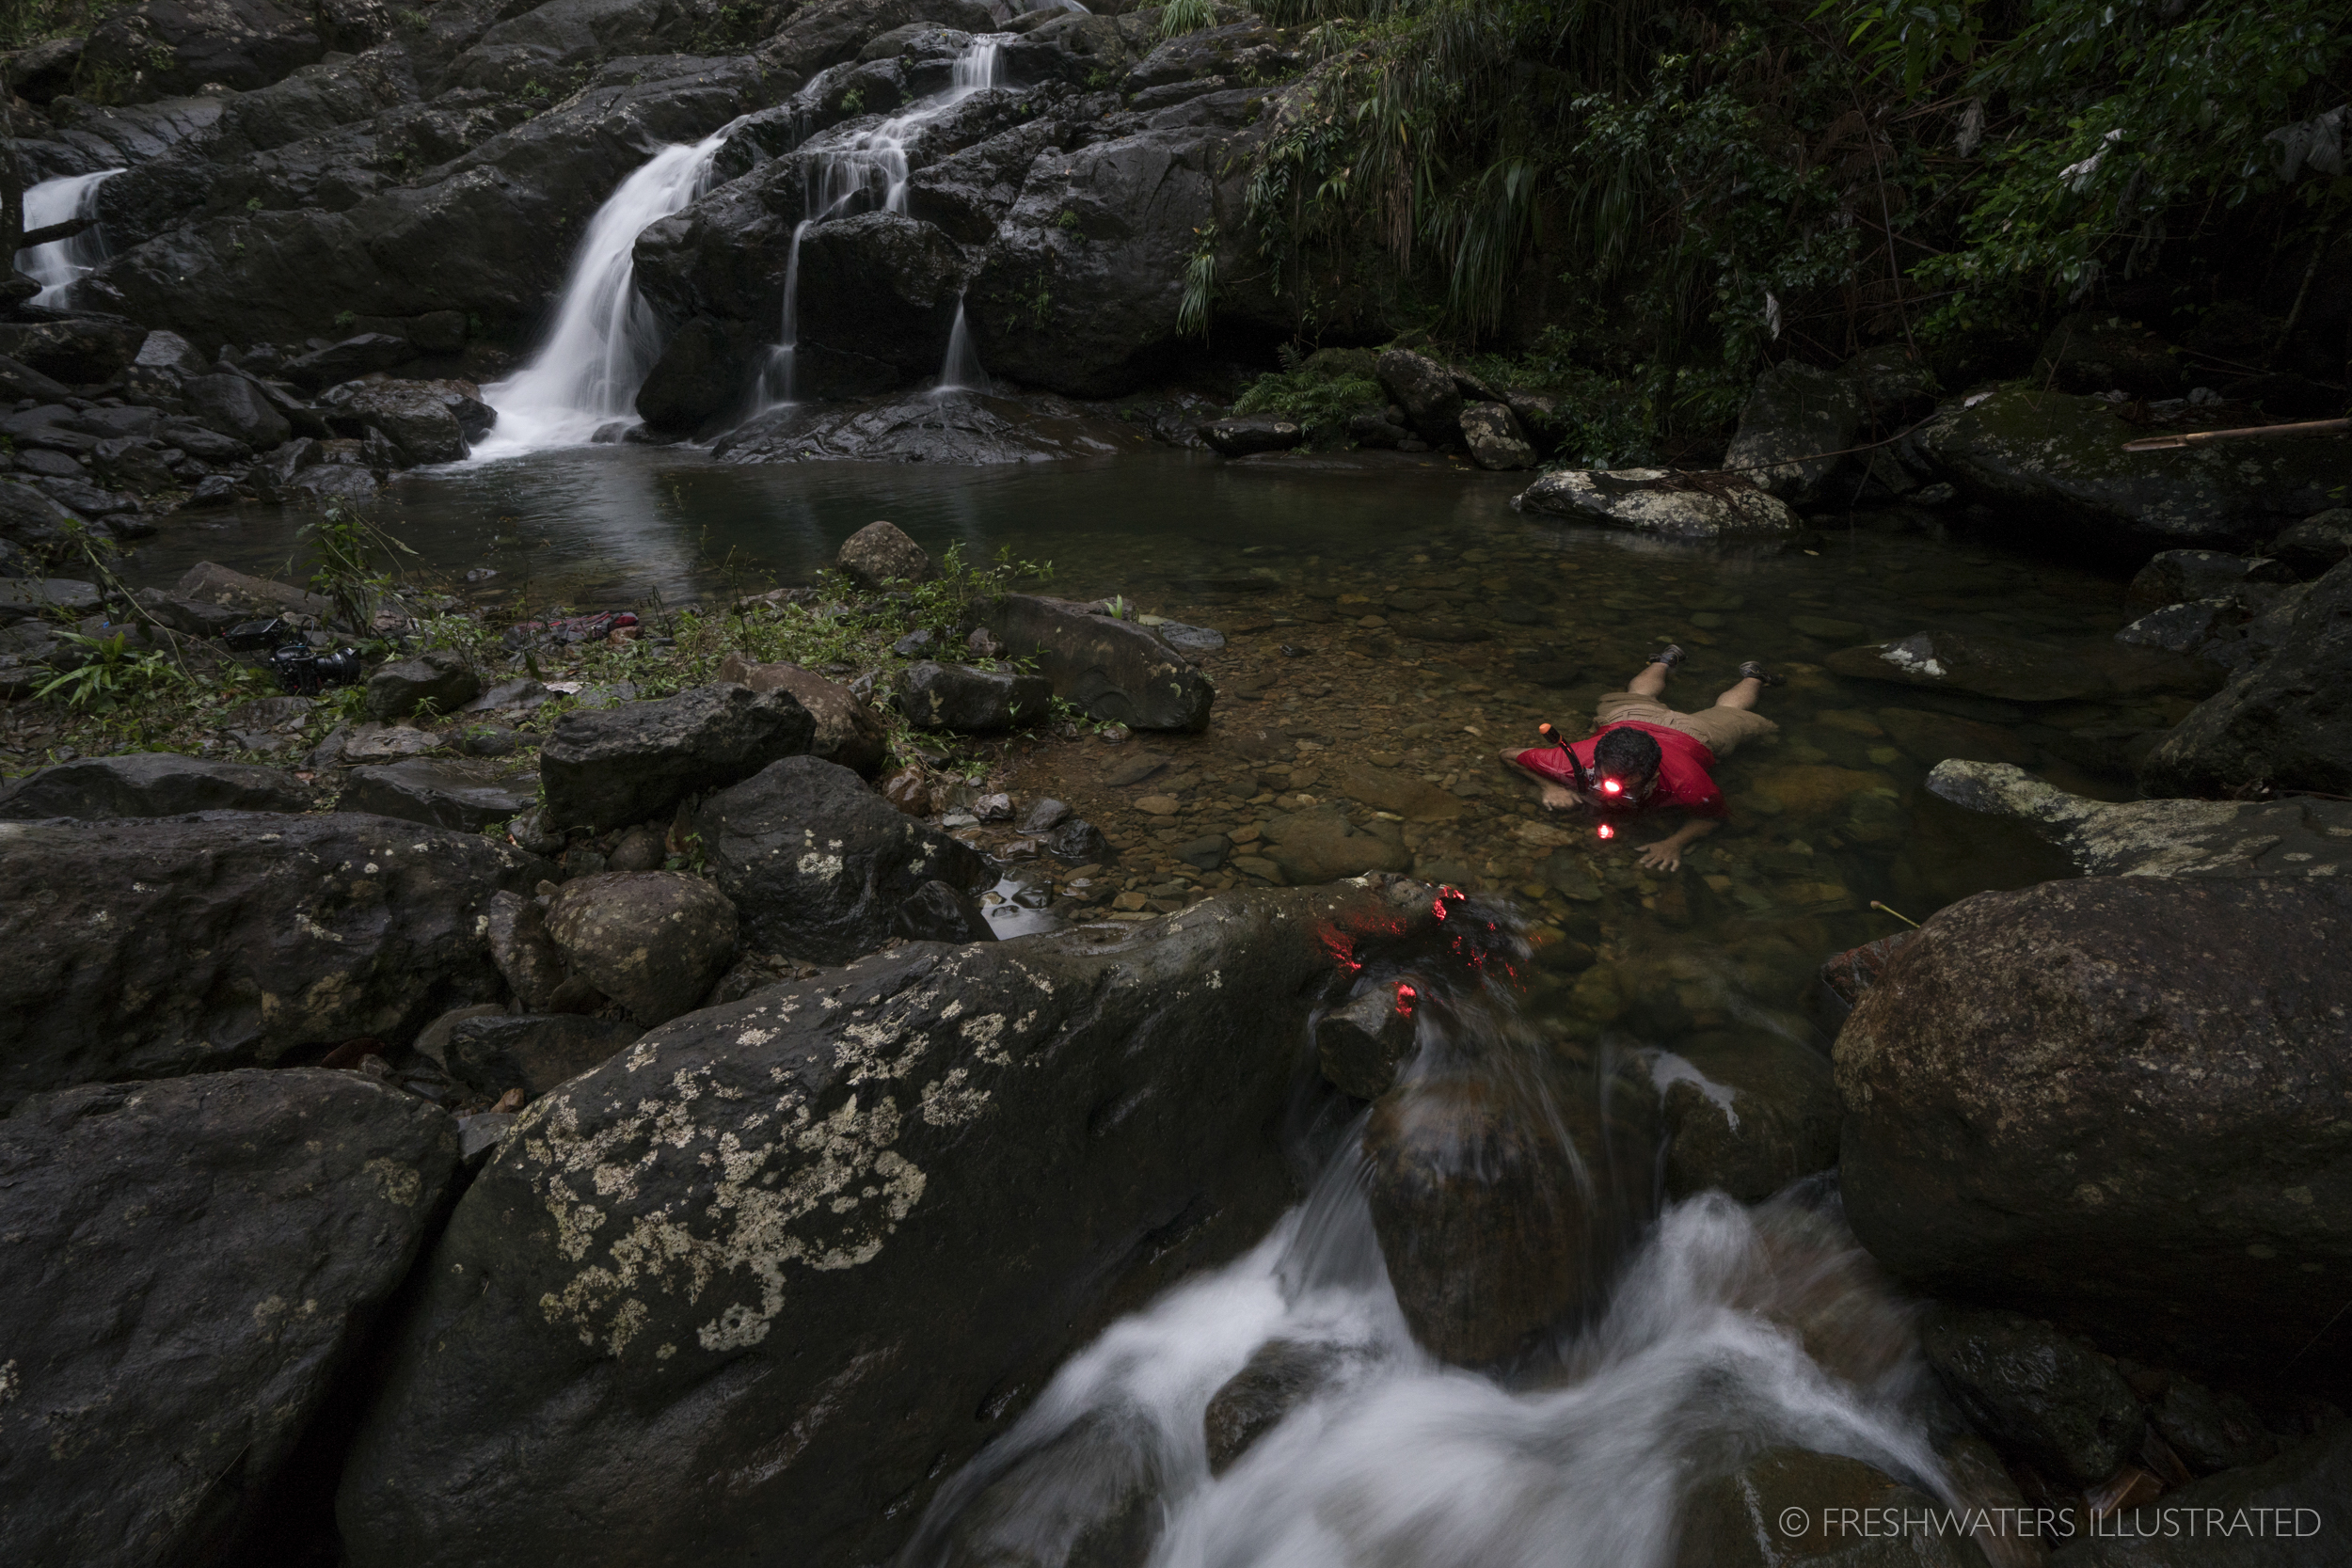  Dr. Omar Perez-Reyes snorkels the cascading waters of the Quebrada Sonadora in search of his study subjects, freshwater shrimp. Surveying river communities throughout Puerto Rico, Dr. Perez-Reyes's work has helped in revealing the importance of fres